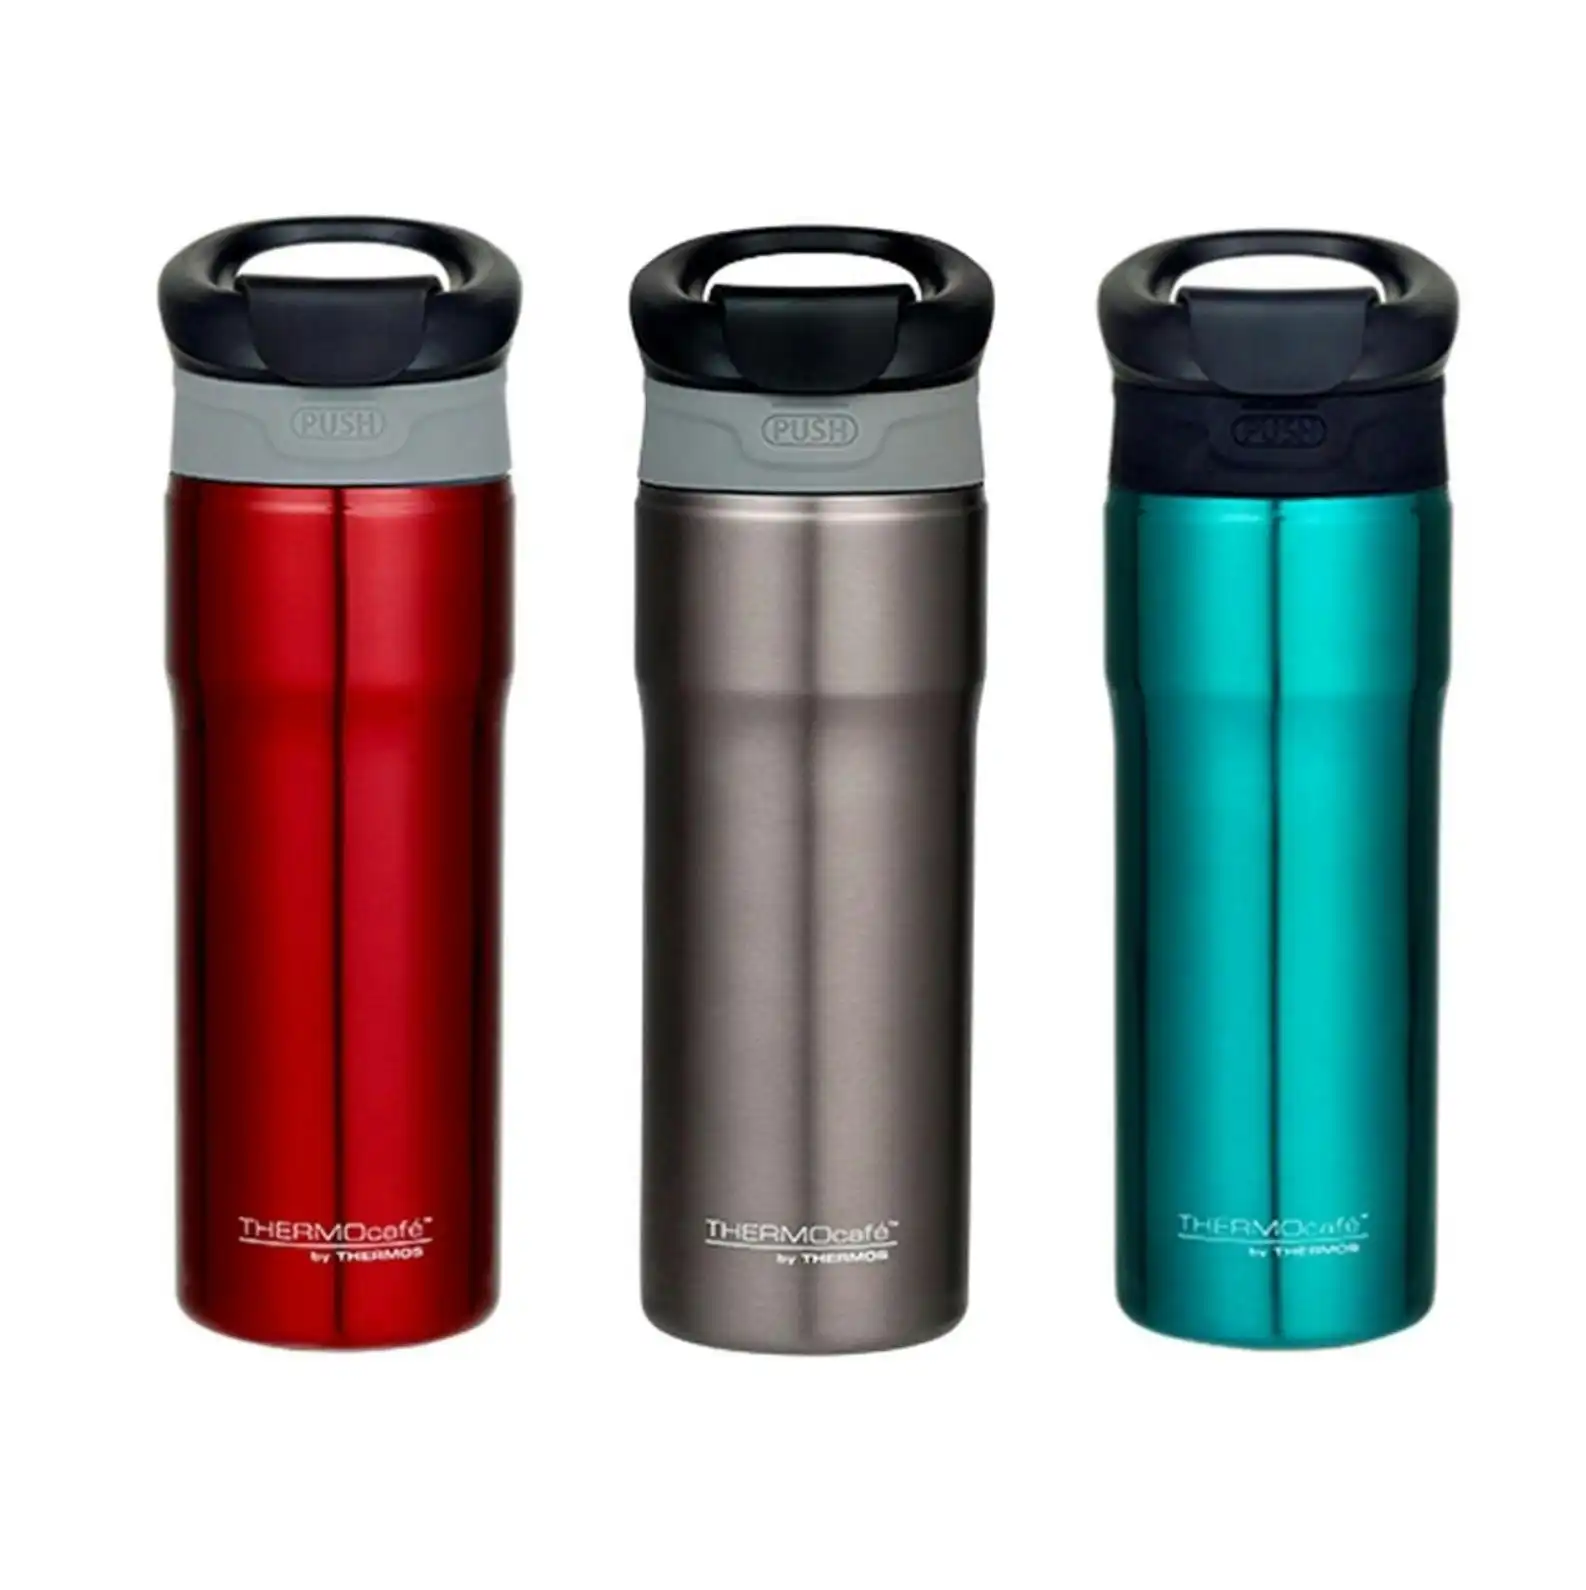 Thermos THERMOCAFE 450ml VACUUM INSULATED TRAVEL MUG - RED, SMOKE OR TEAL